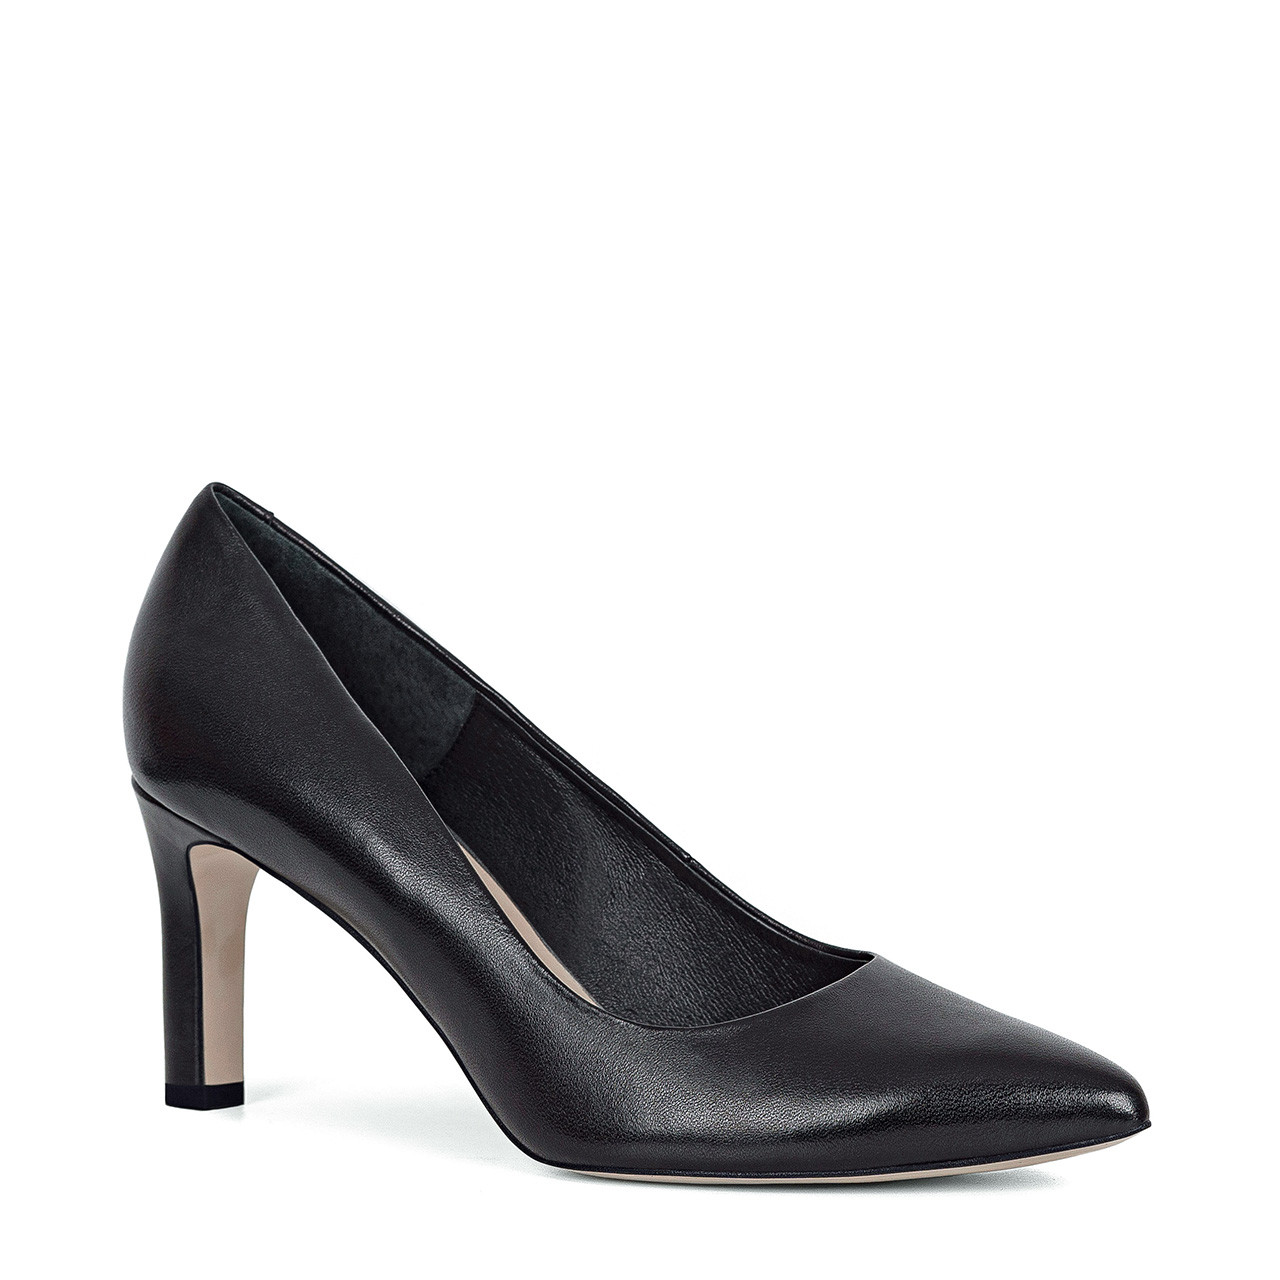 Black pumps with a stable high heel handmade of natural grain leather ...